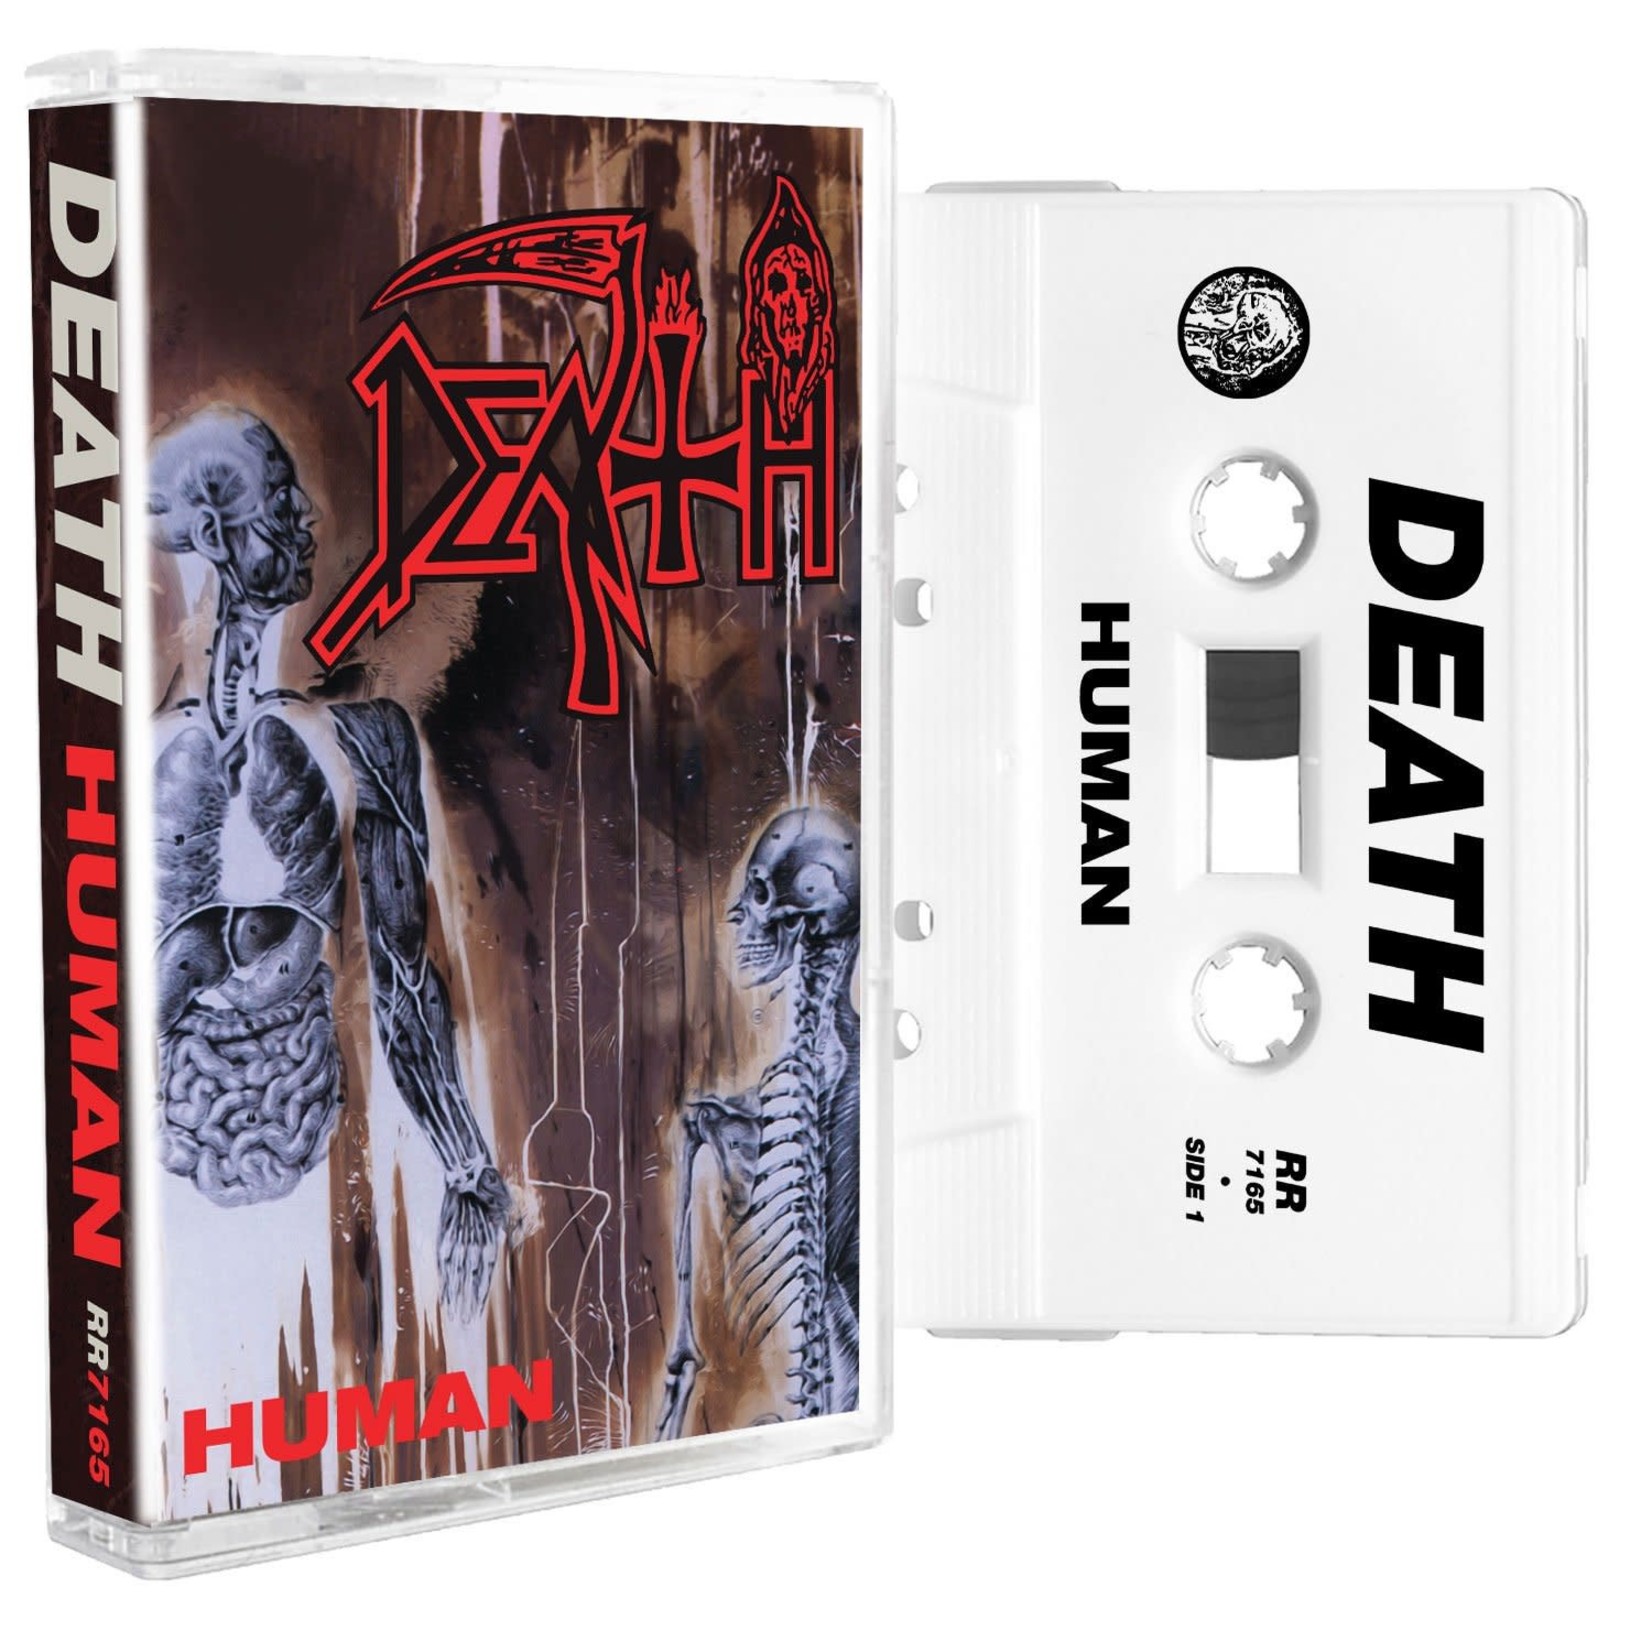 Relapse Death - Human (Tape)